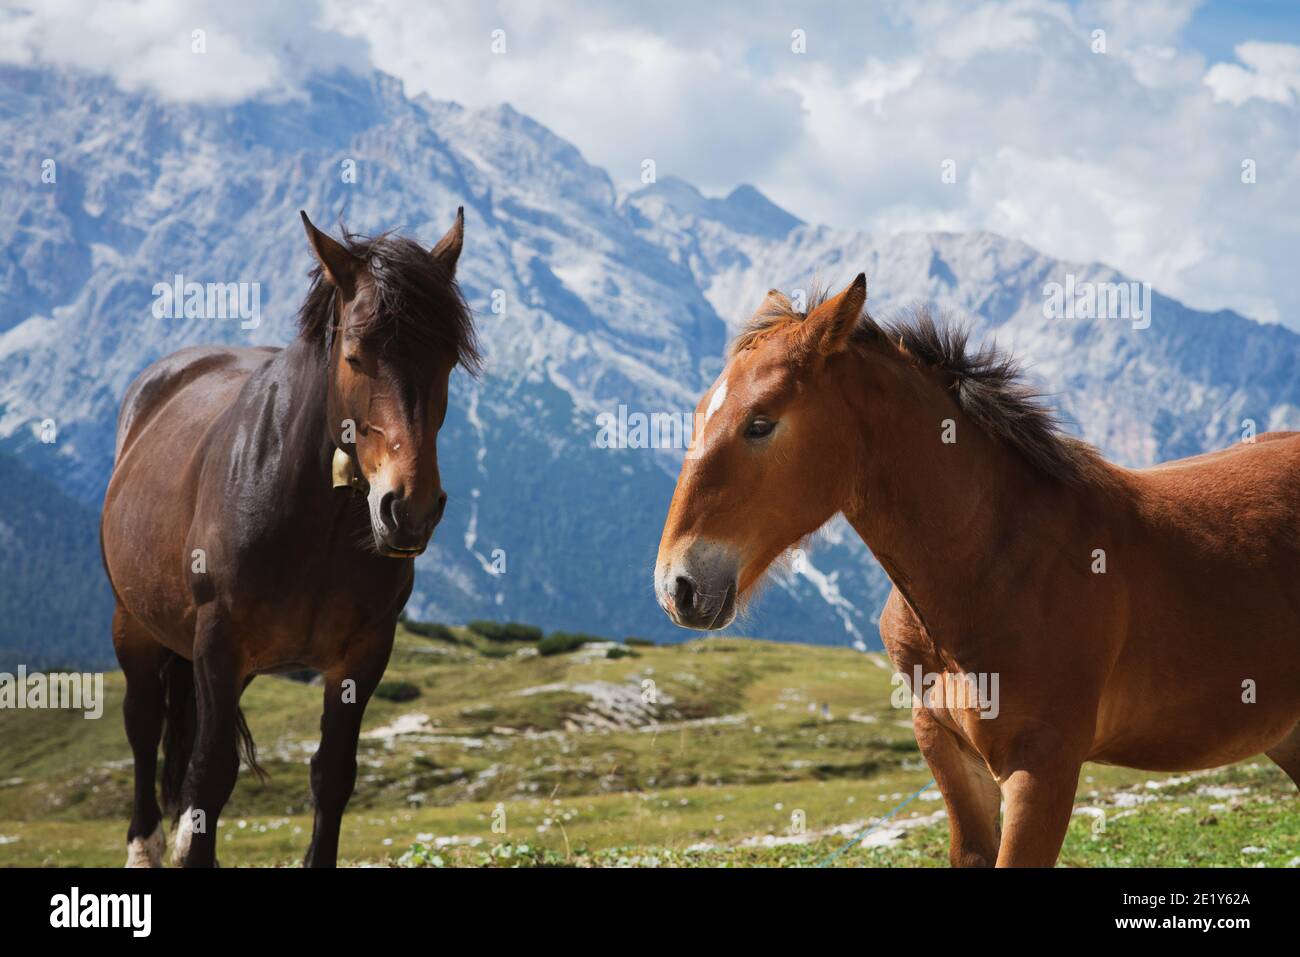 Portrait of horses in the mountains Stock Photo